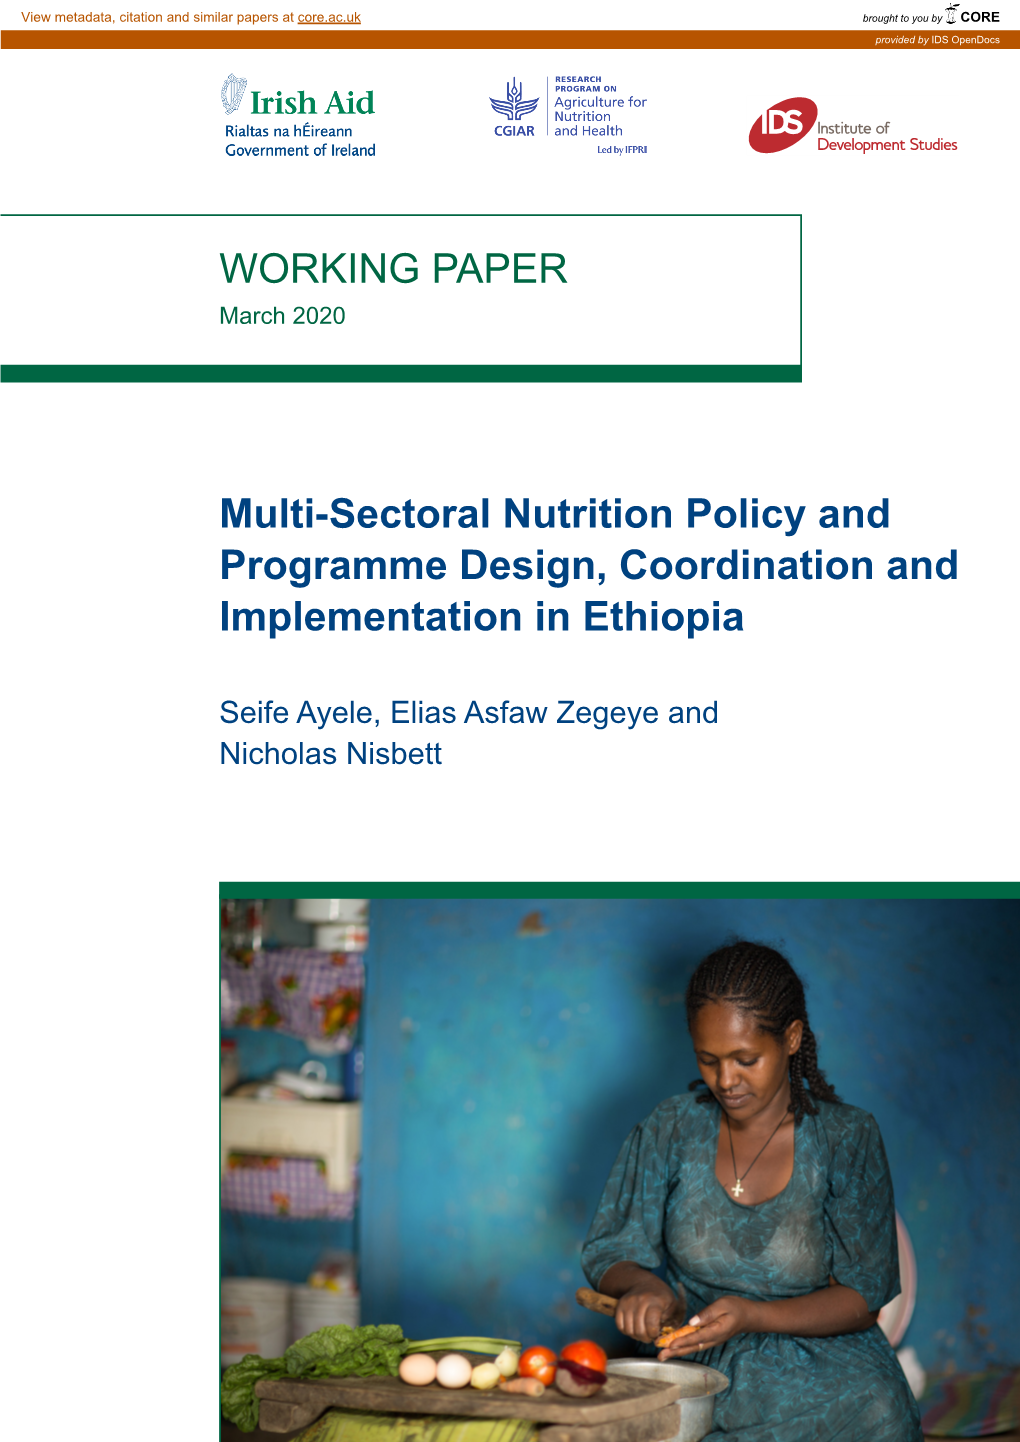 Multi-Sectoral Nutrition Policy and Programme Design, Coordination and Implementation in Ethiopia